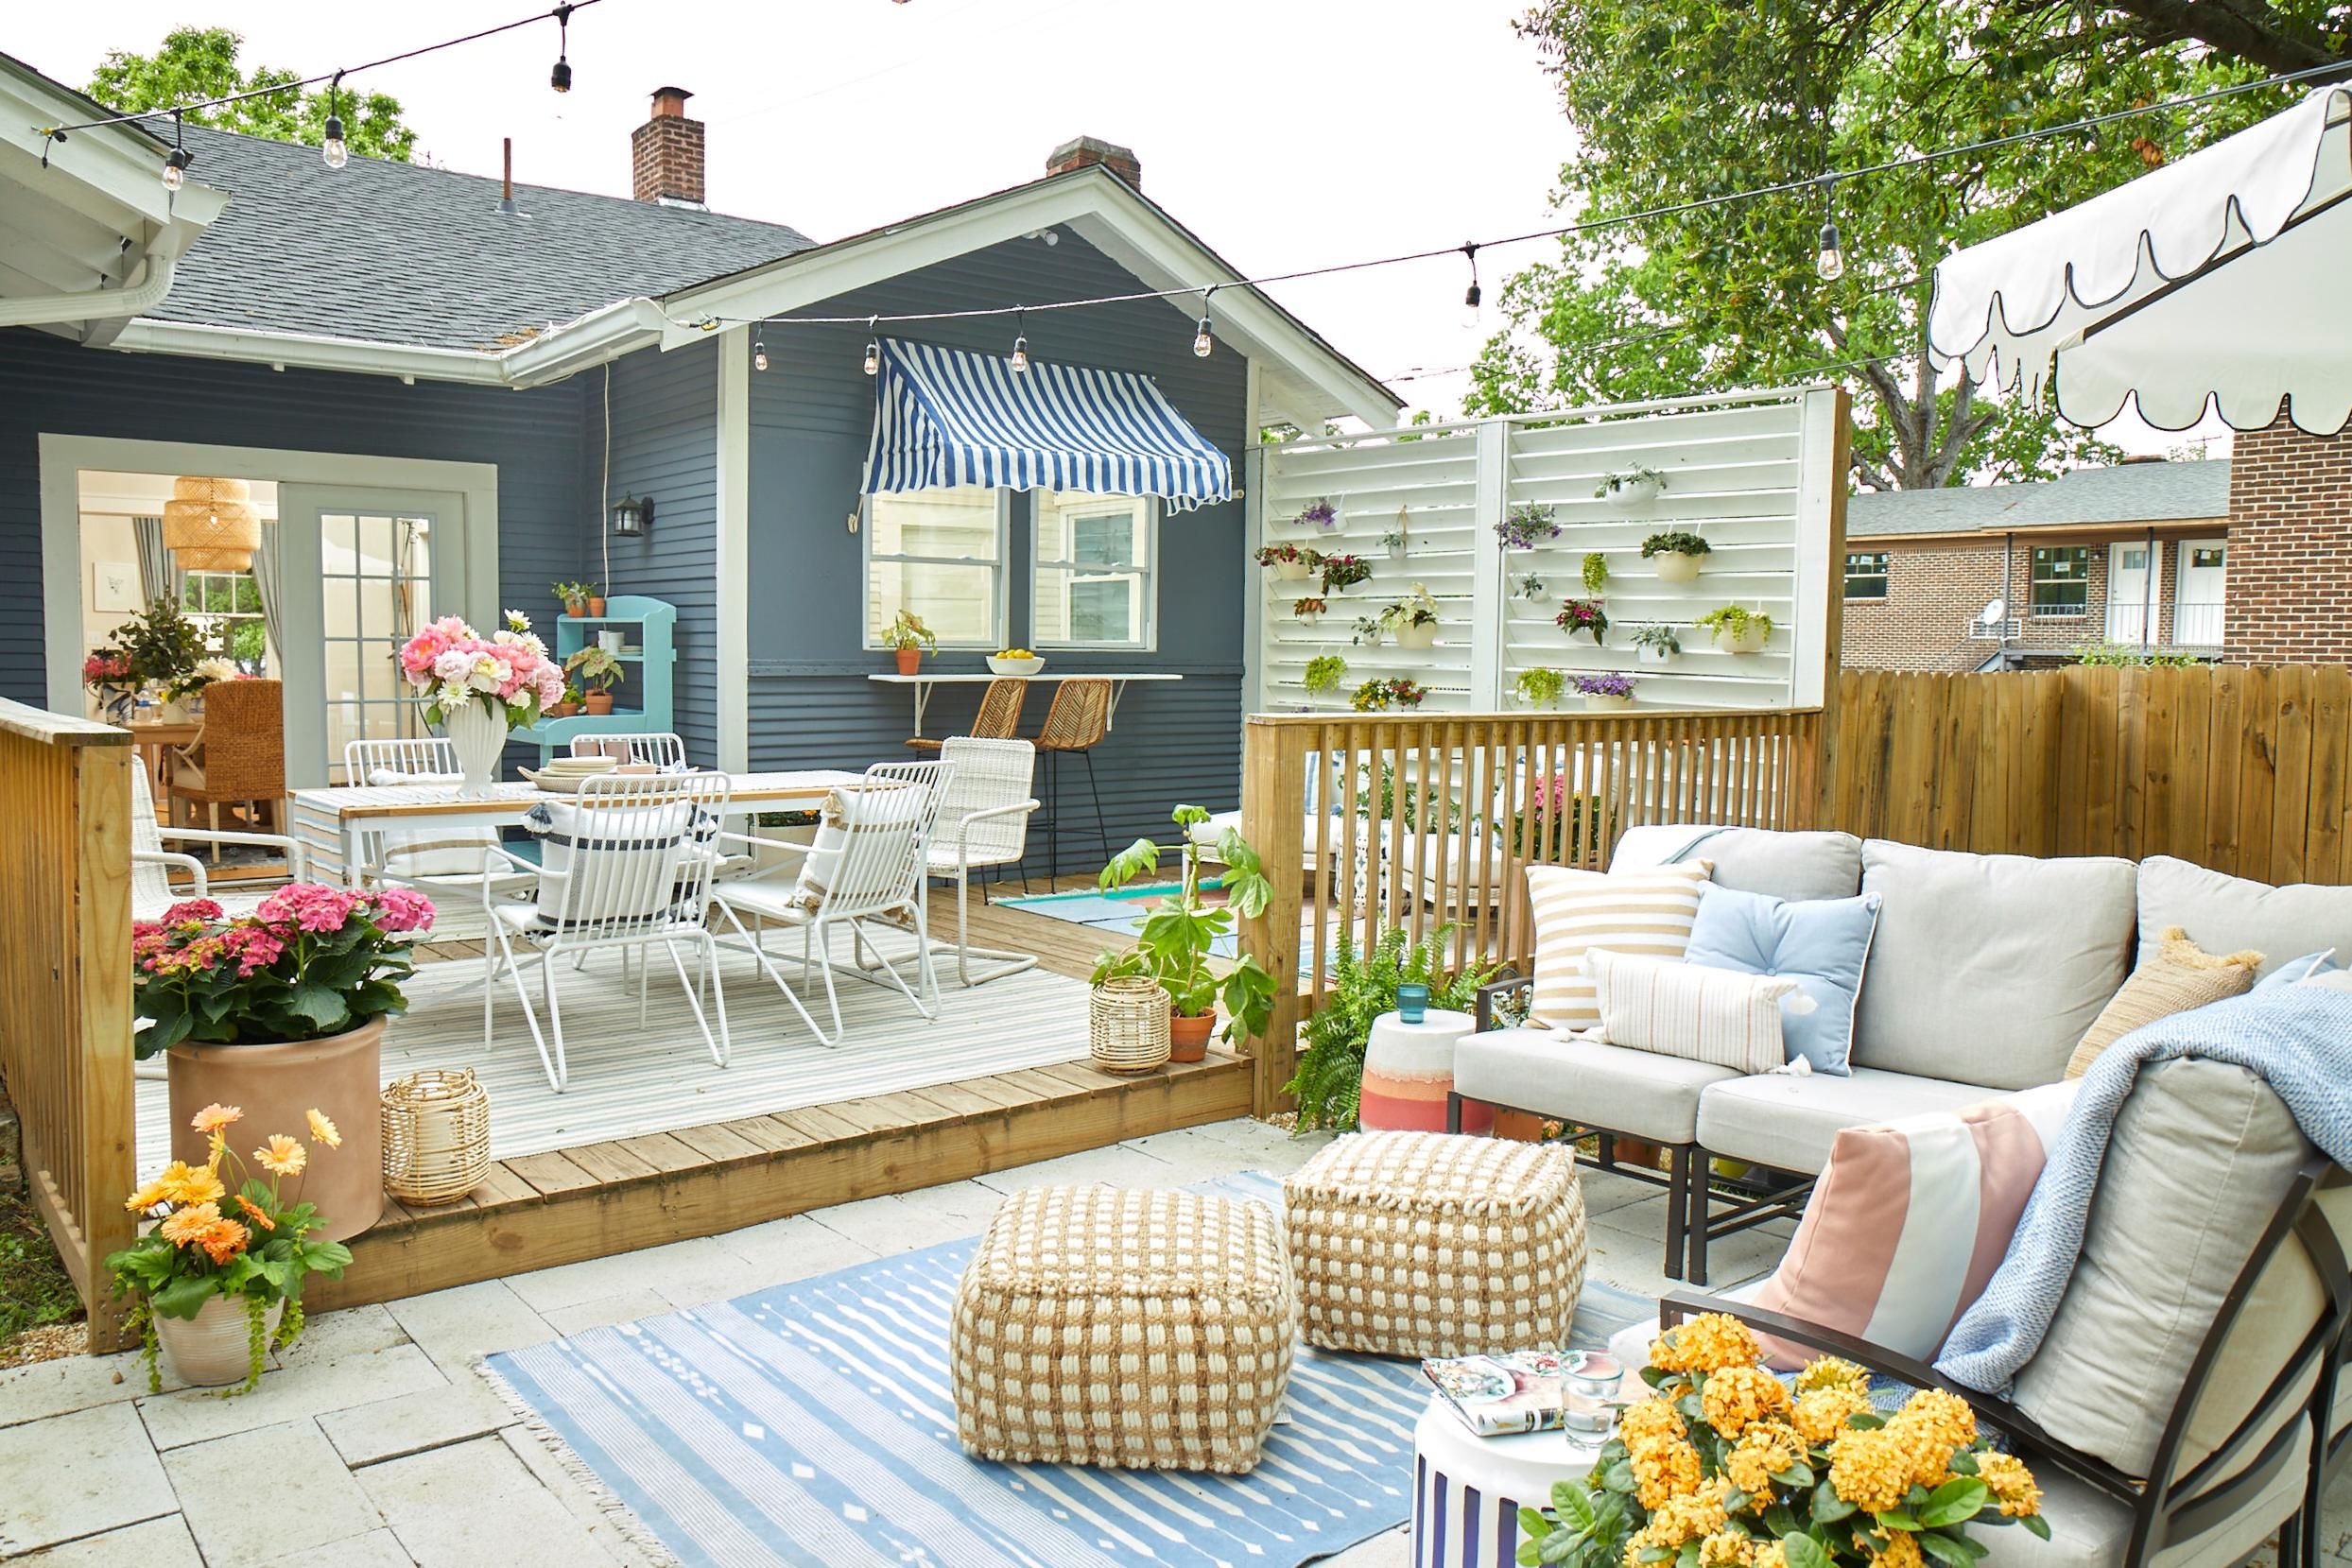 41 Best Patio and Porch Design Ideas - Decorating Your Outdoor Space